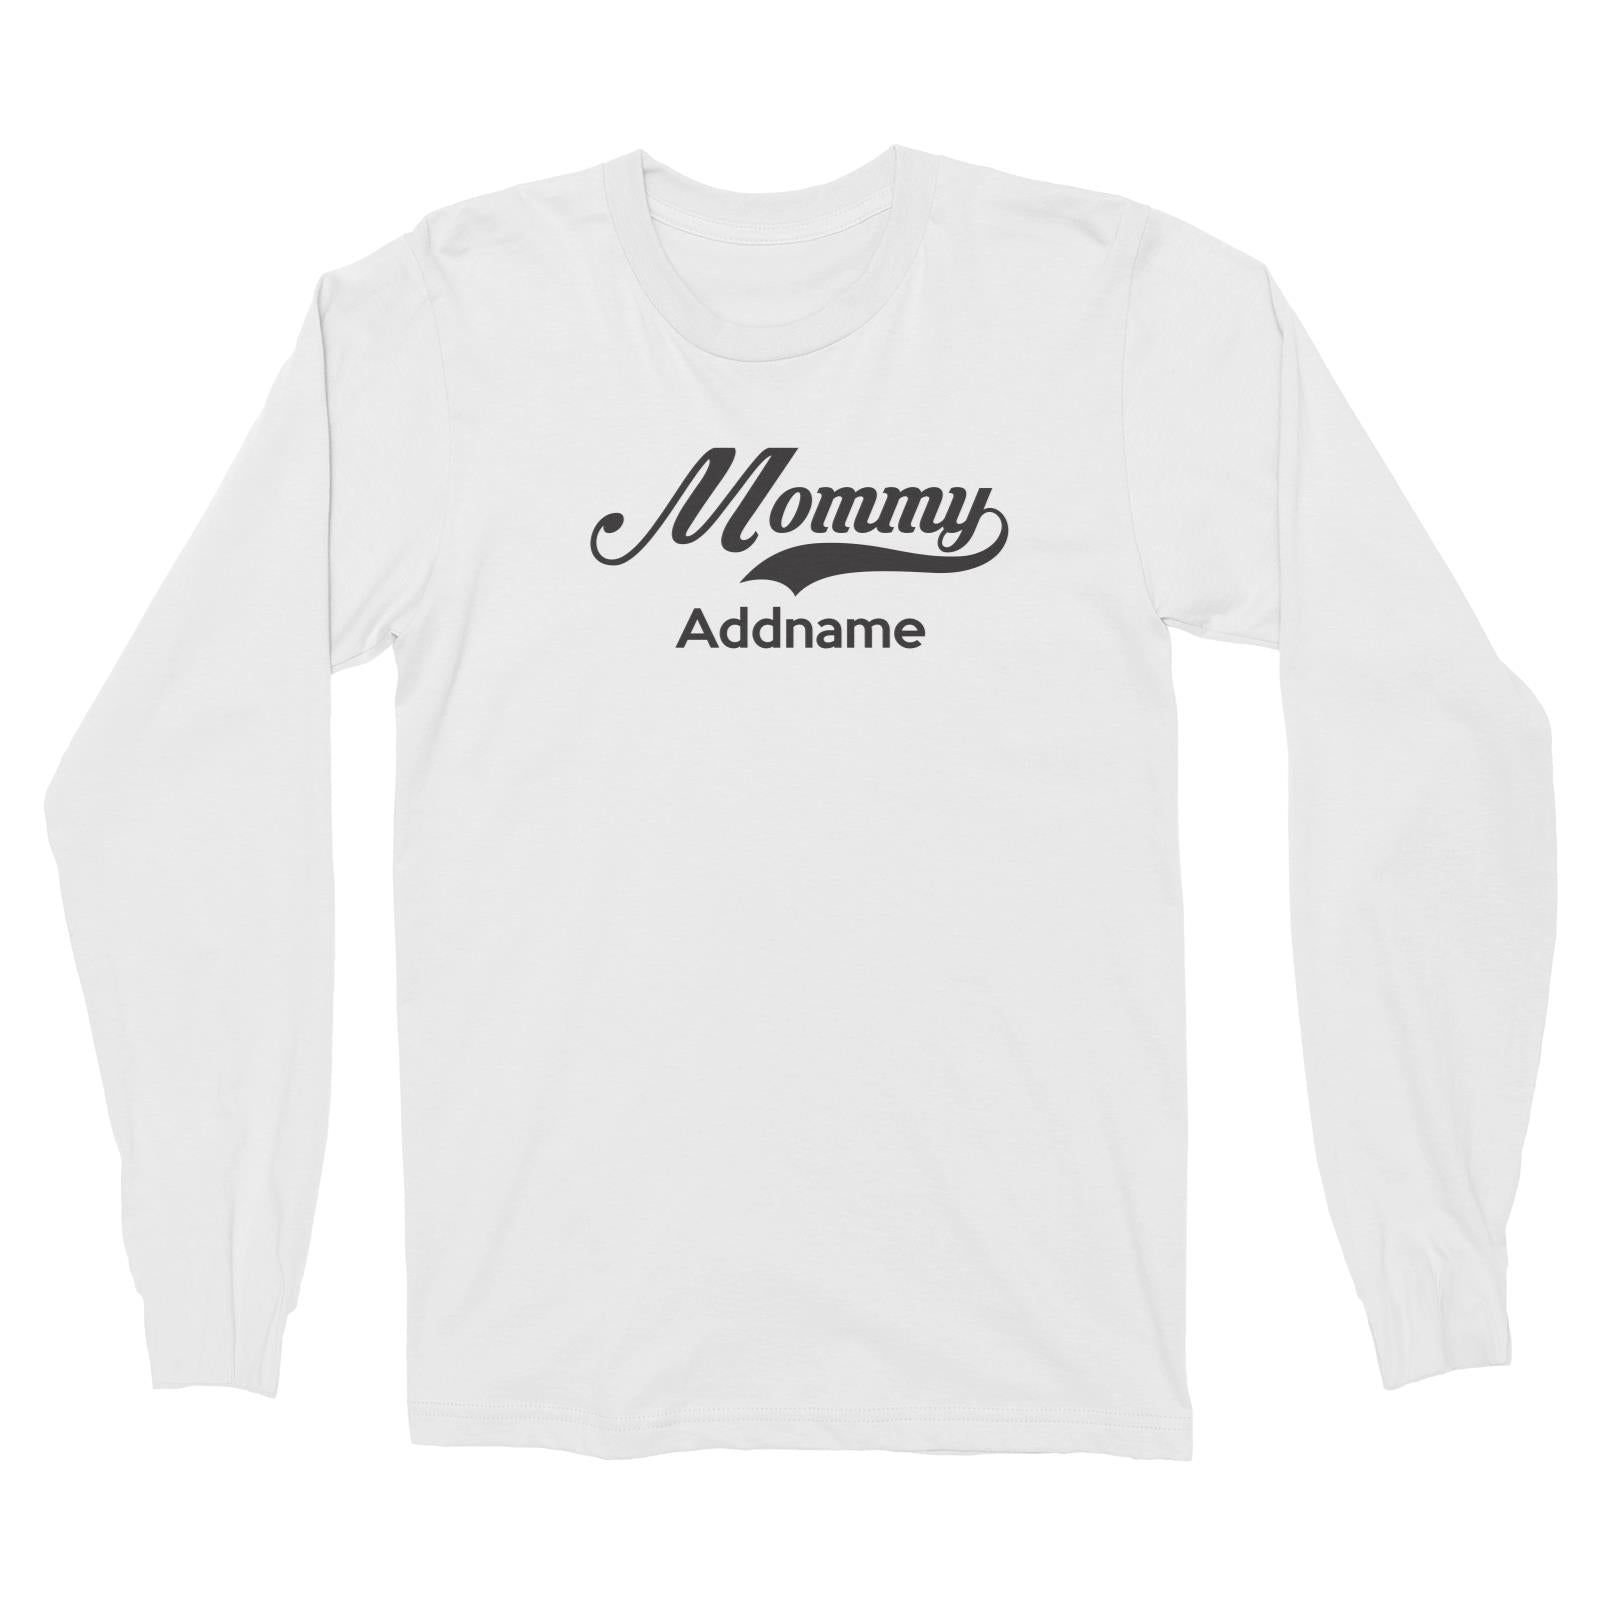 Retro Mommy Addname Long Sleeve Unisex T-Shirt  Matching Family Personalizable Designs